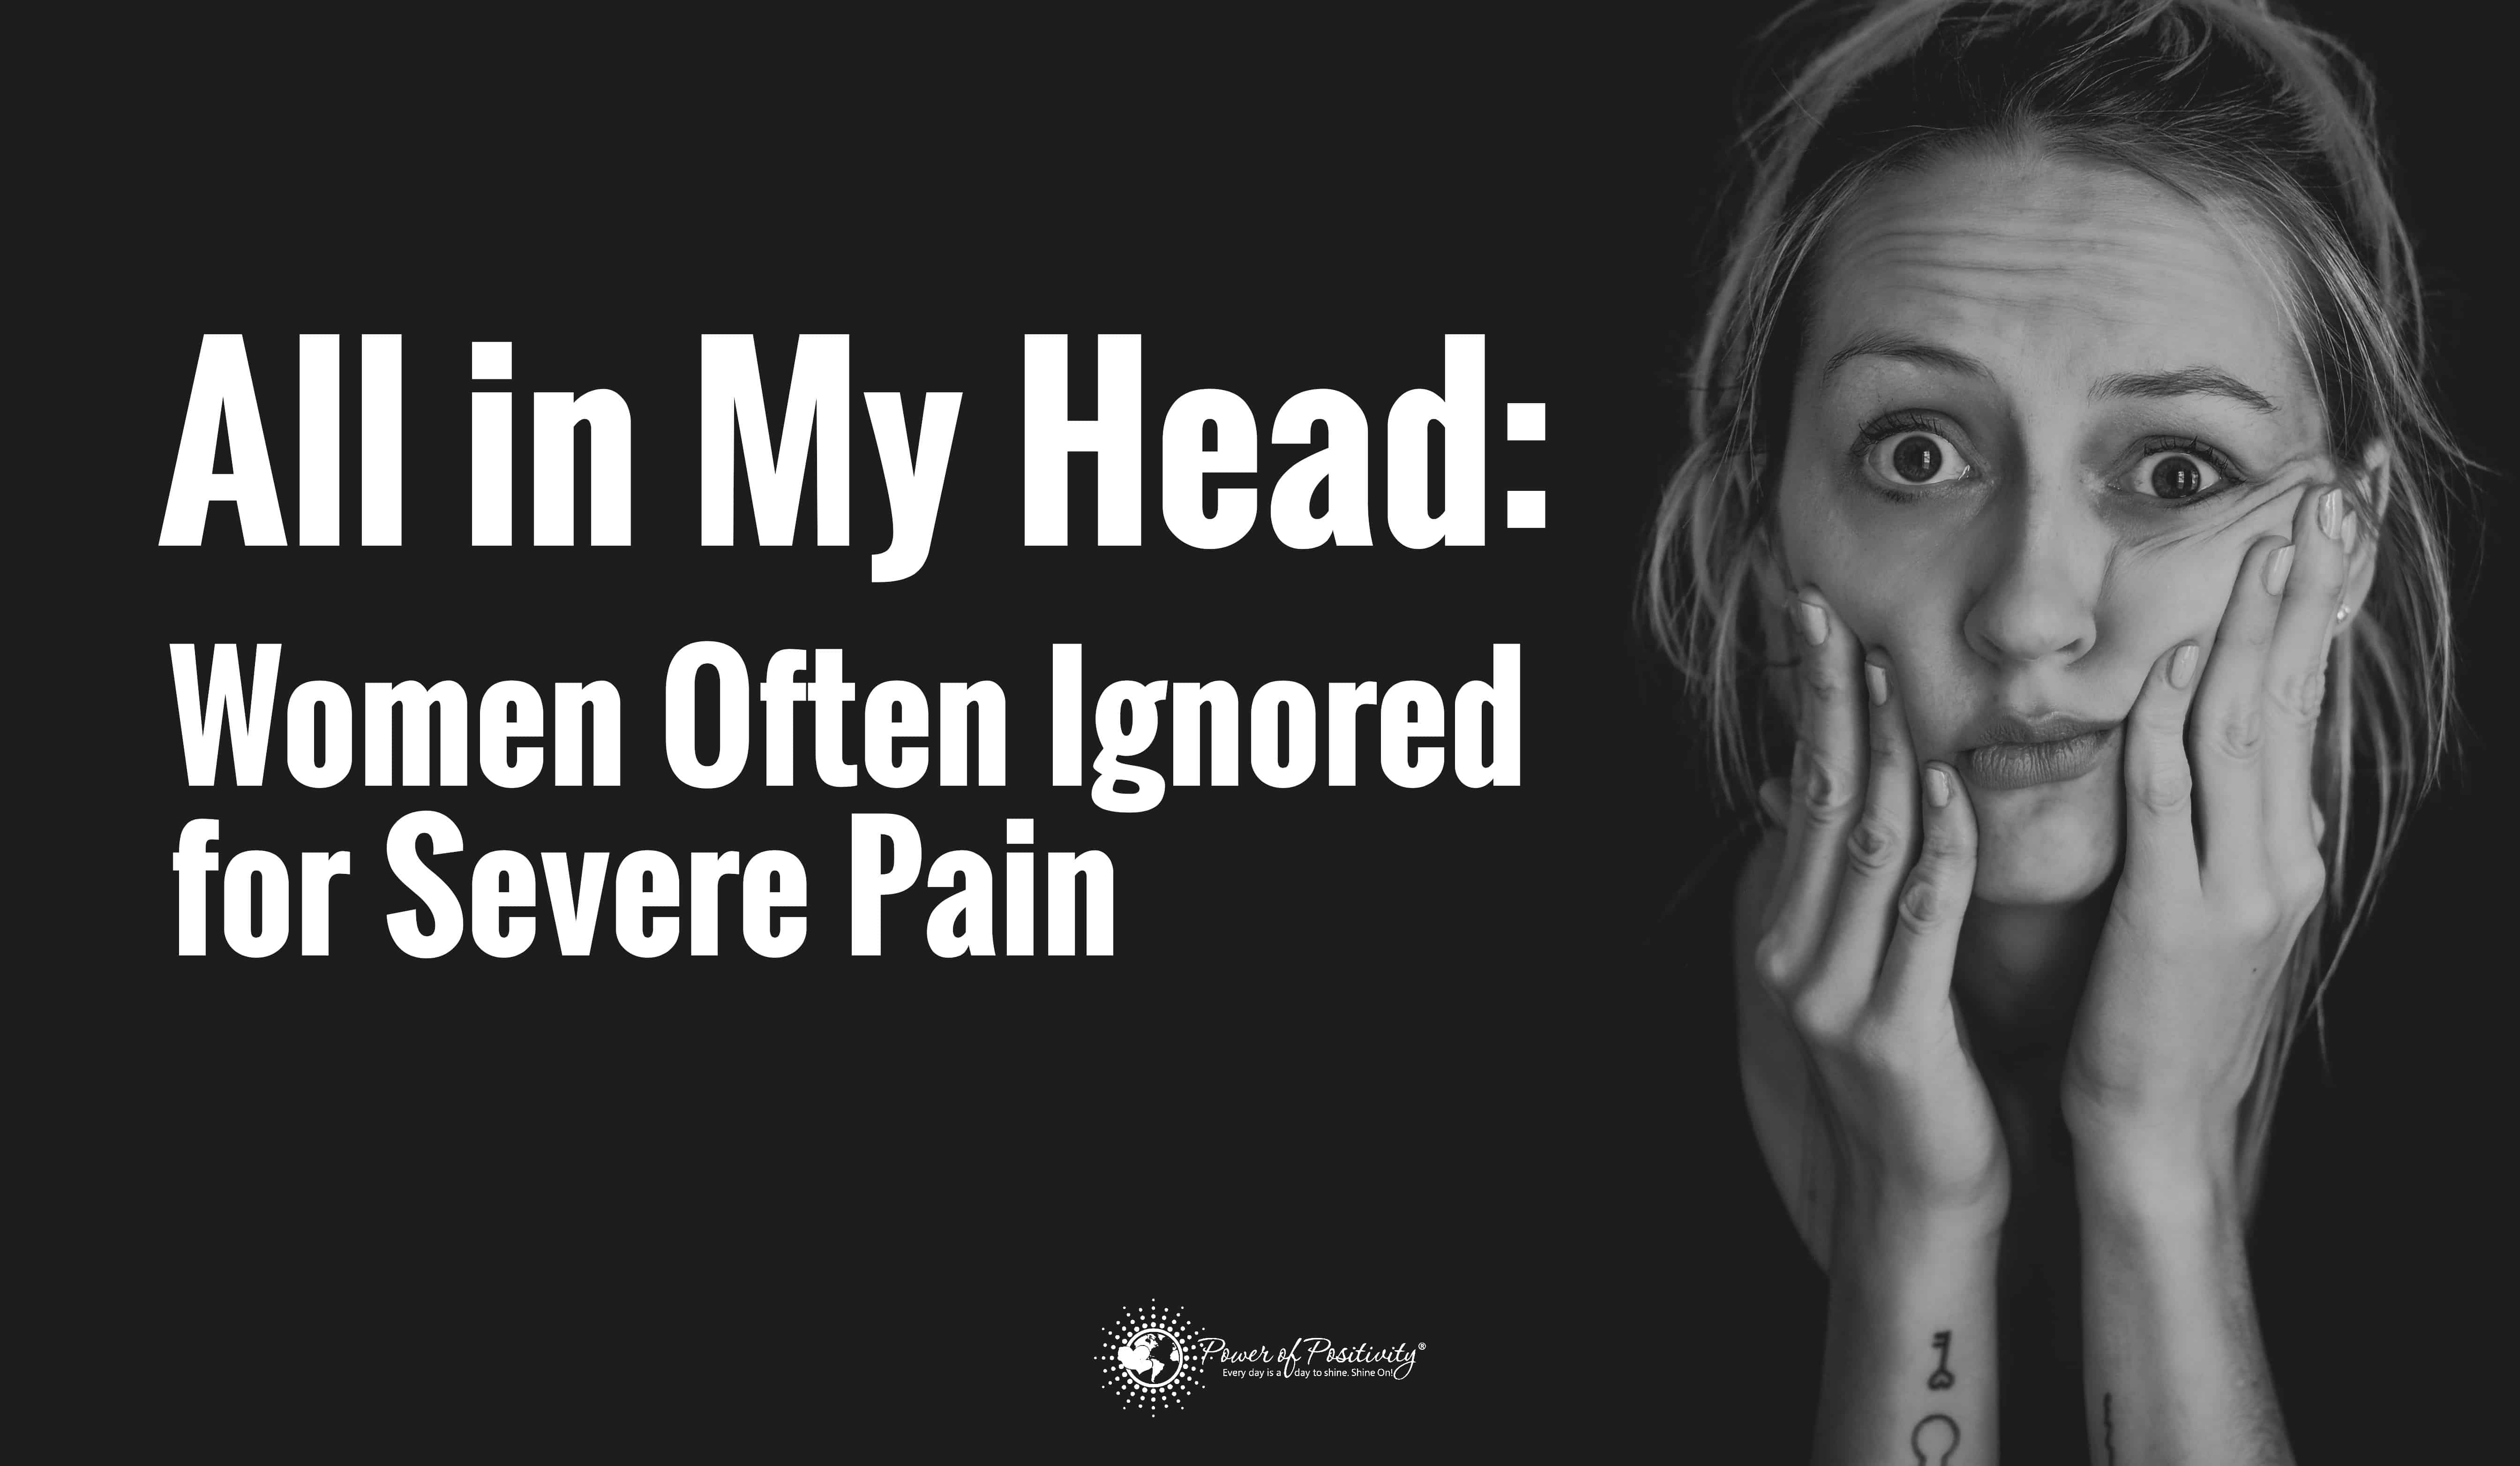 All in My Head: Women Often Ignored for Severe Pain